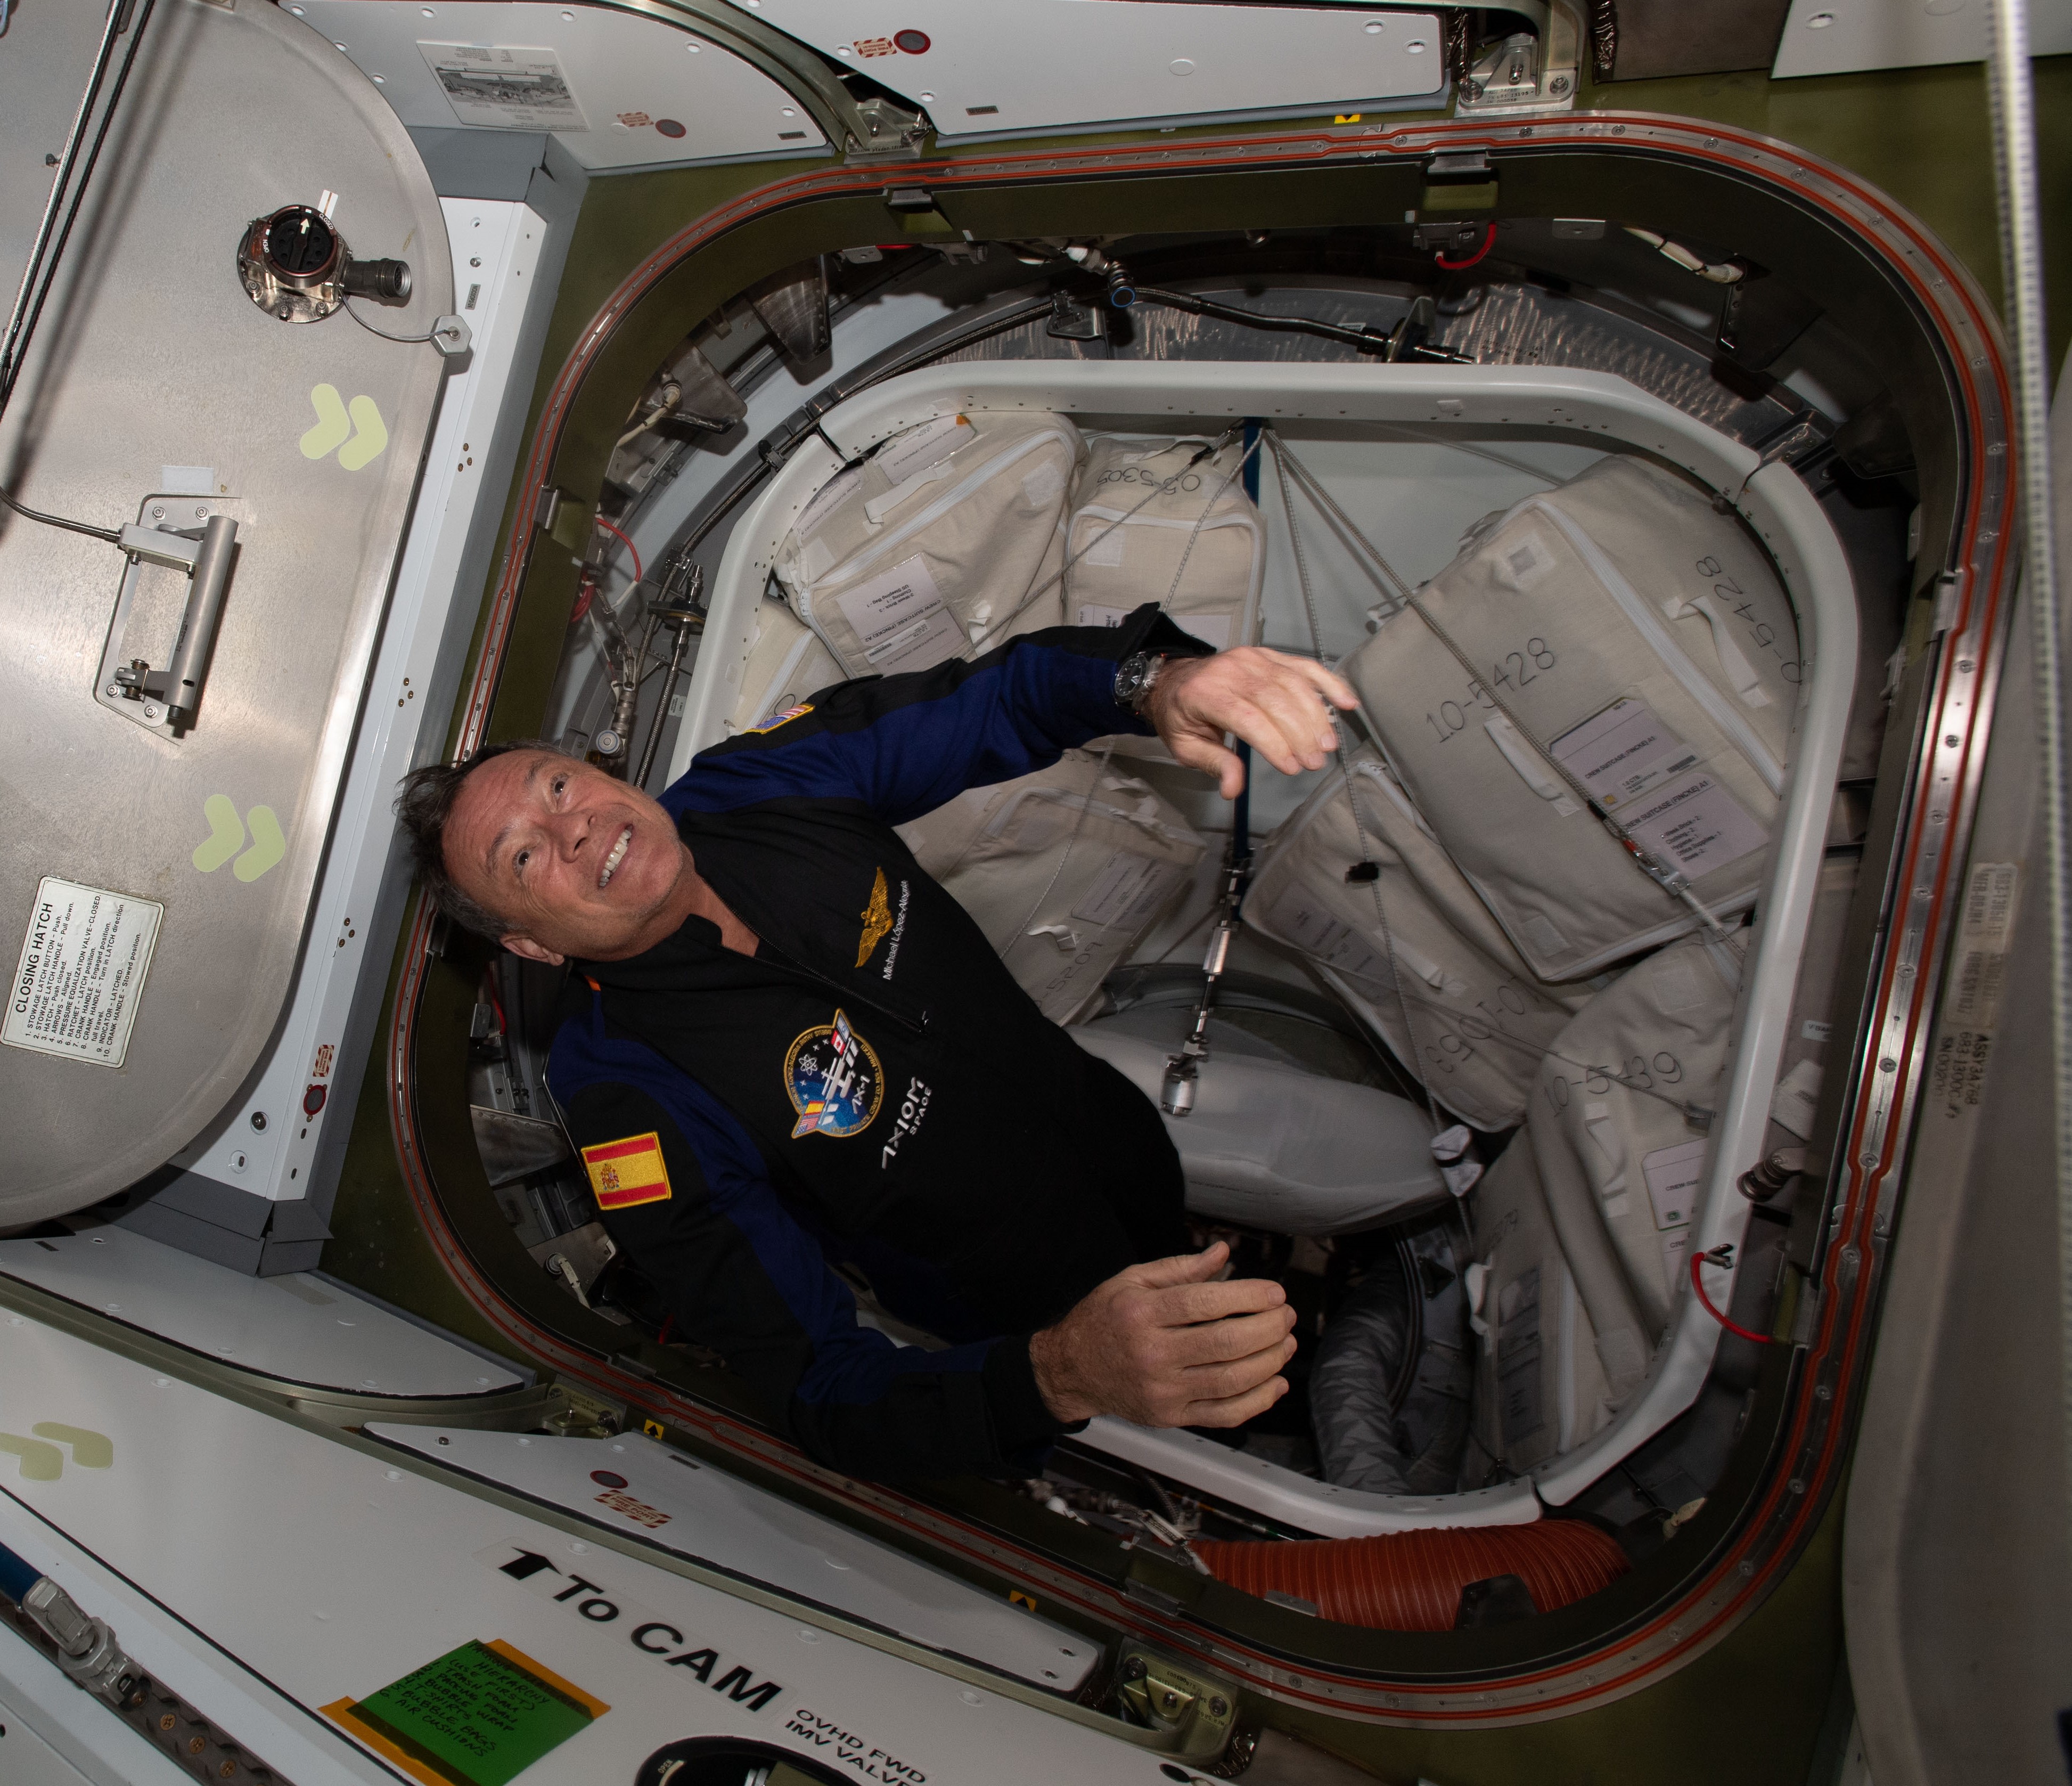 Axiom astronaut Michael E. Lopez-Alegria floats into the space station during the Ax-1 mission